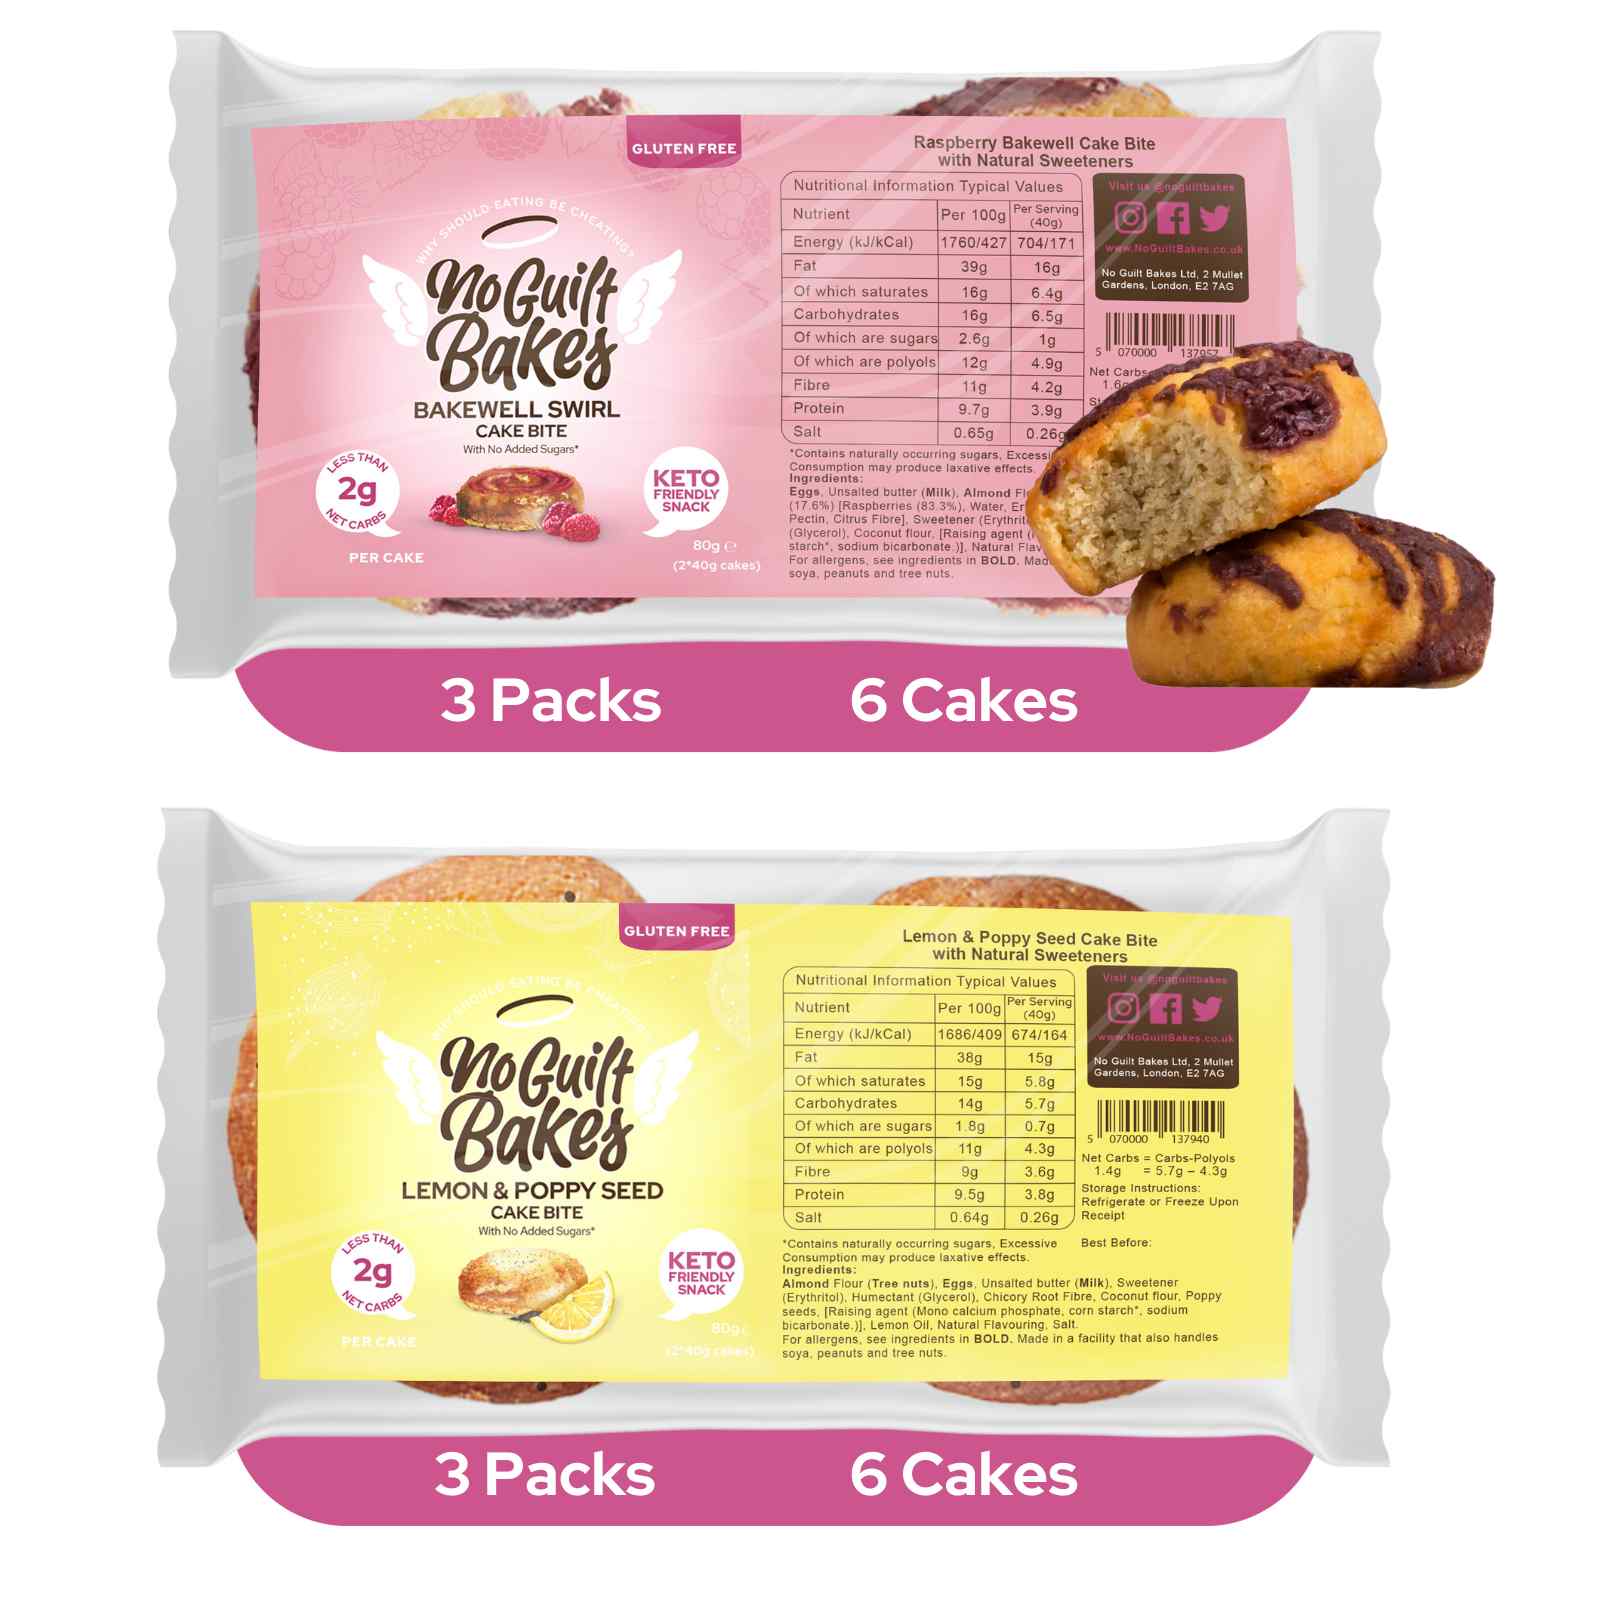 A package of No Guilt Bakes' Fruity Variety Cake Bite Pack with a variety of flavors including lemon & poppy seed.